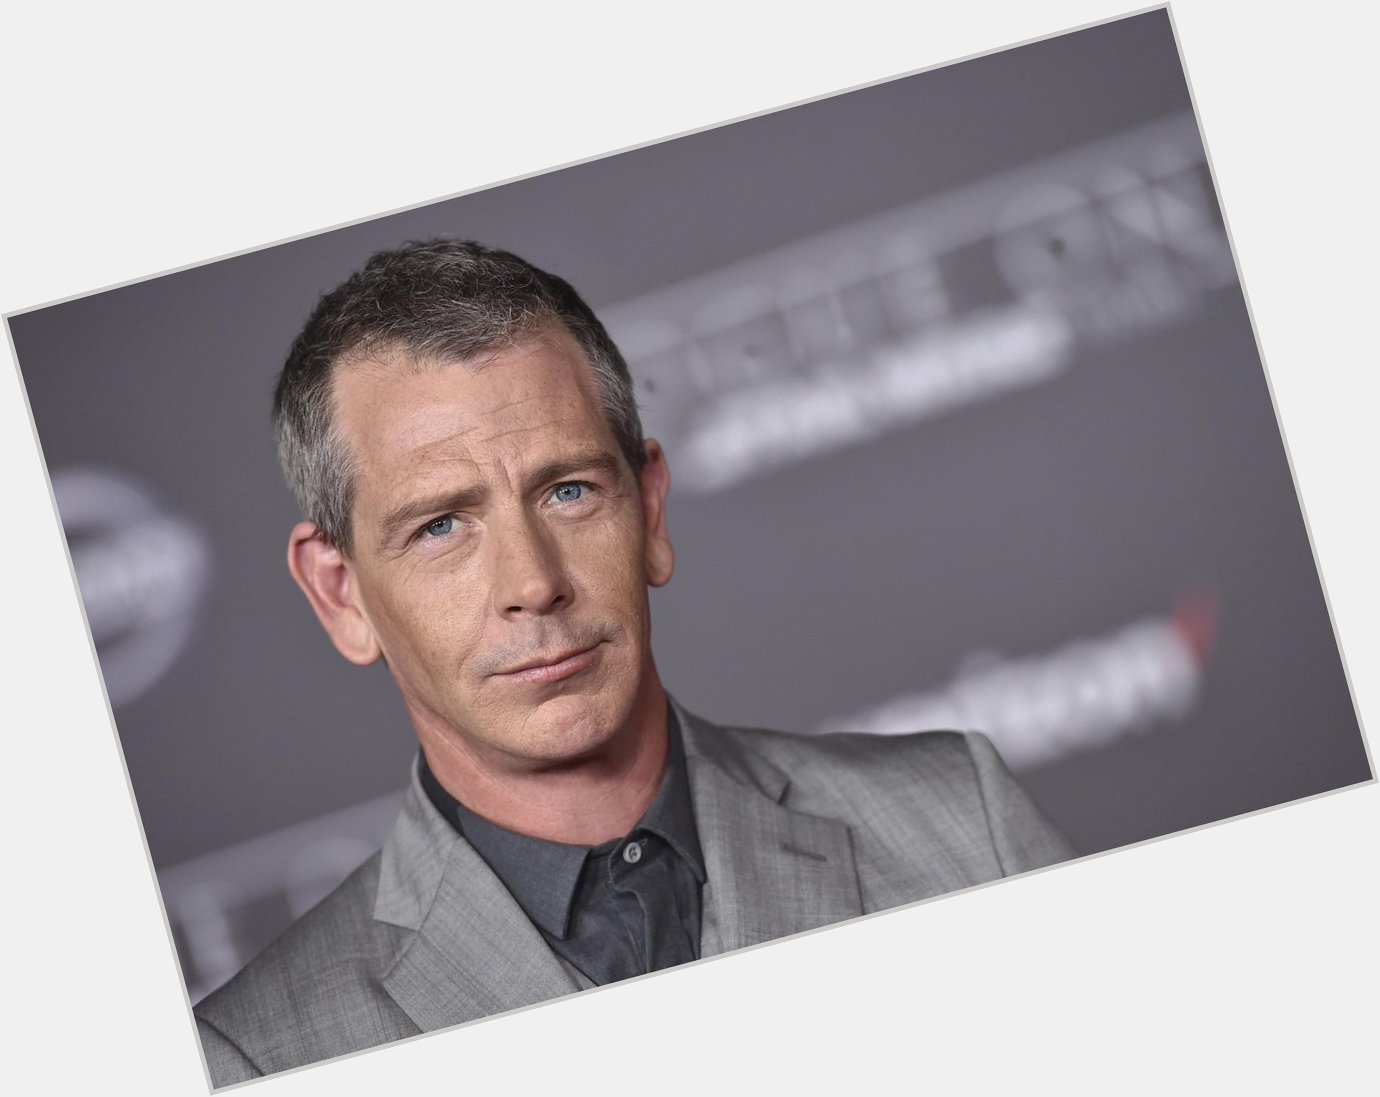 Happy birthday to Ben Mendelsohn, who played Orson Krennic in Rogue One! May the Force be with you! 